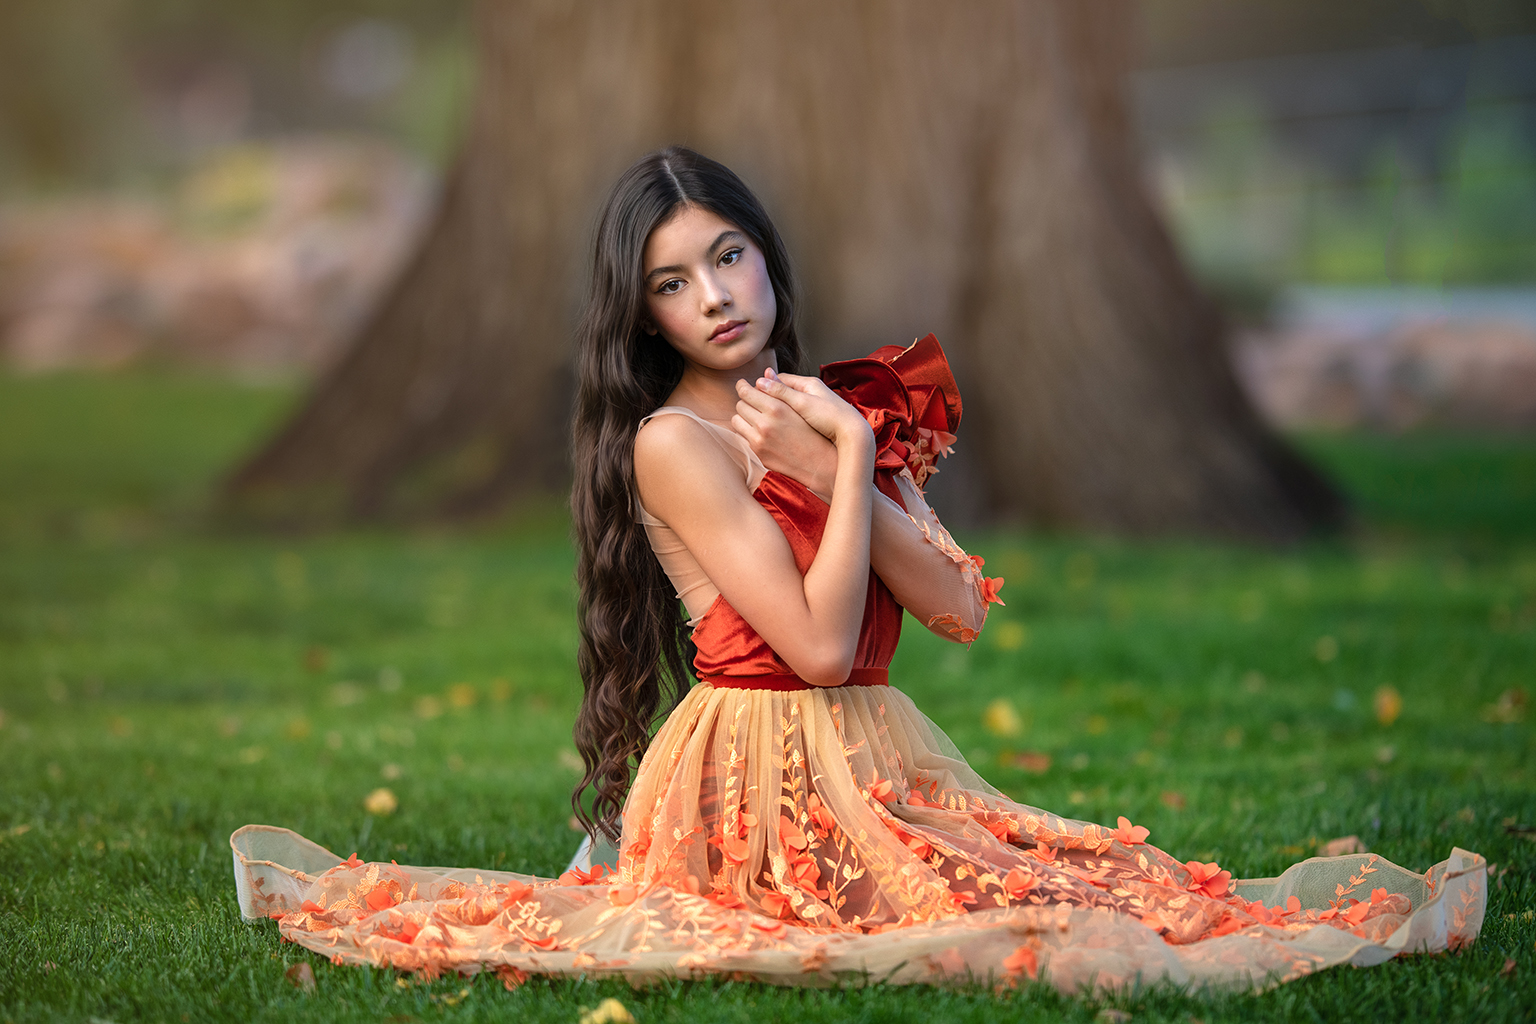 A young girl wearing an orange gown.